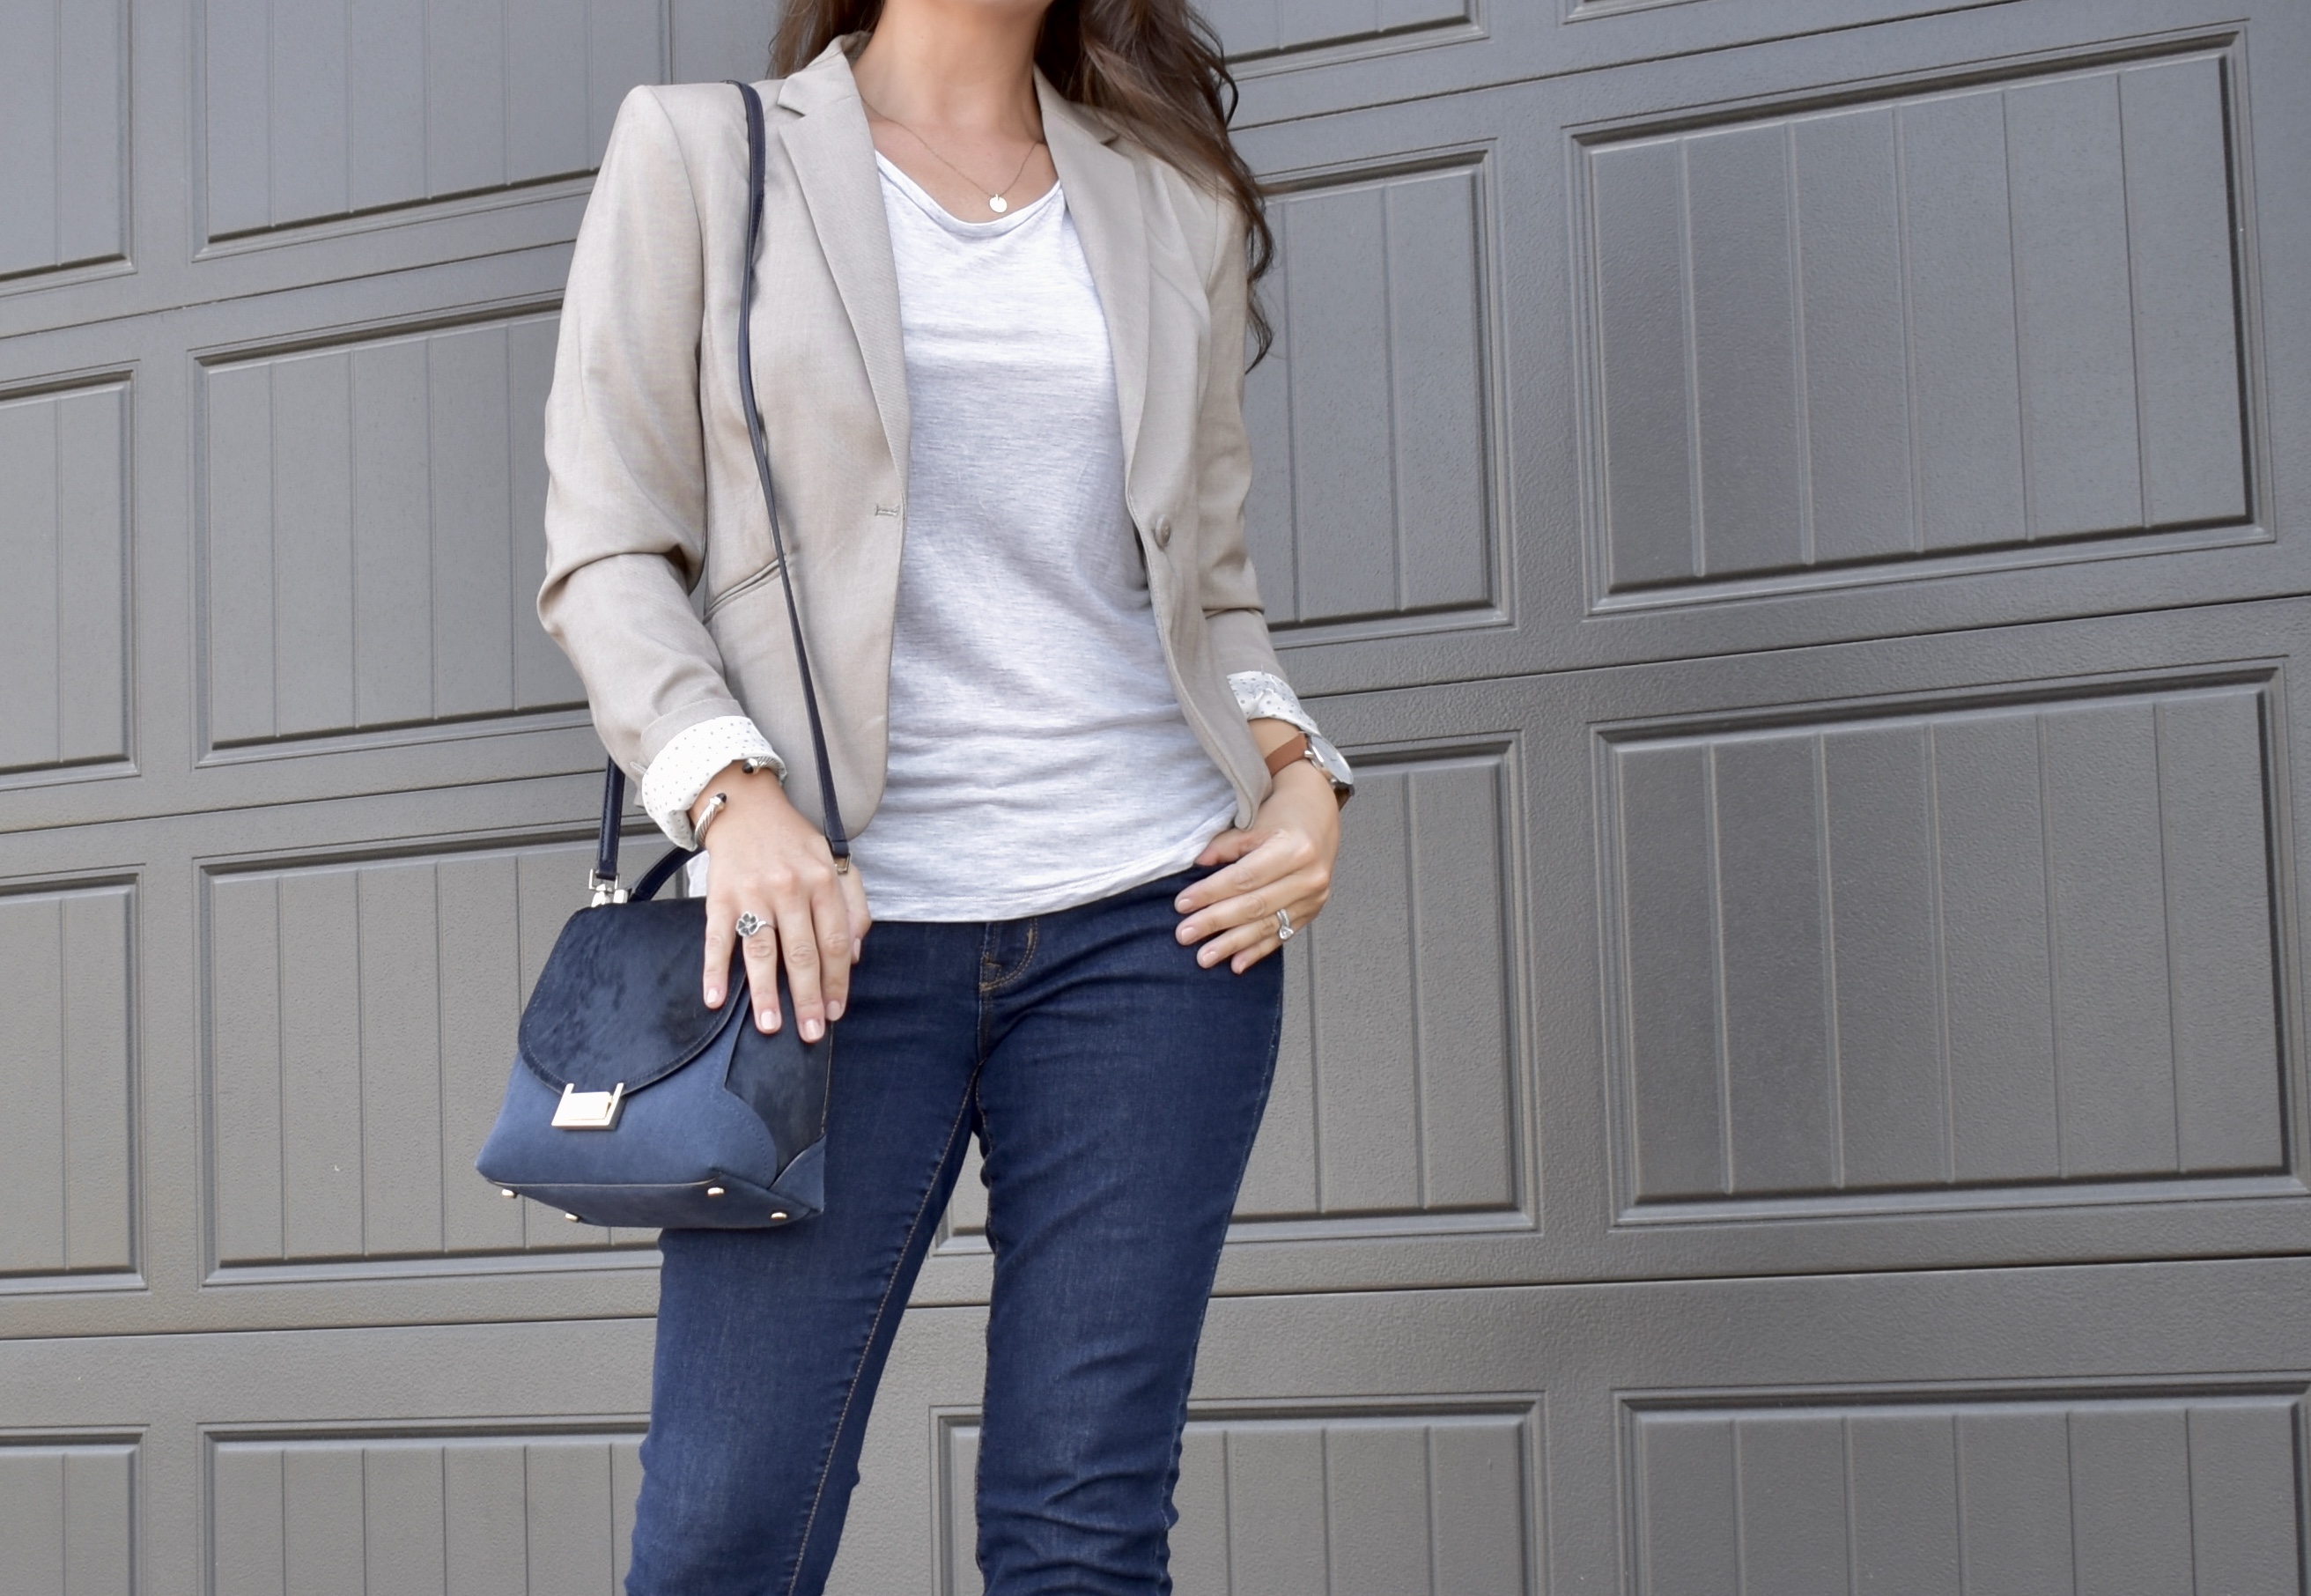 Cathedrals and Cafes Blog | Office Style: Business Casual Meets Chic | workwear, office style, blazer, jeans, structured bag